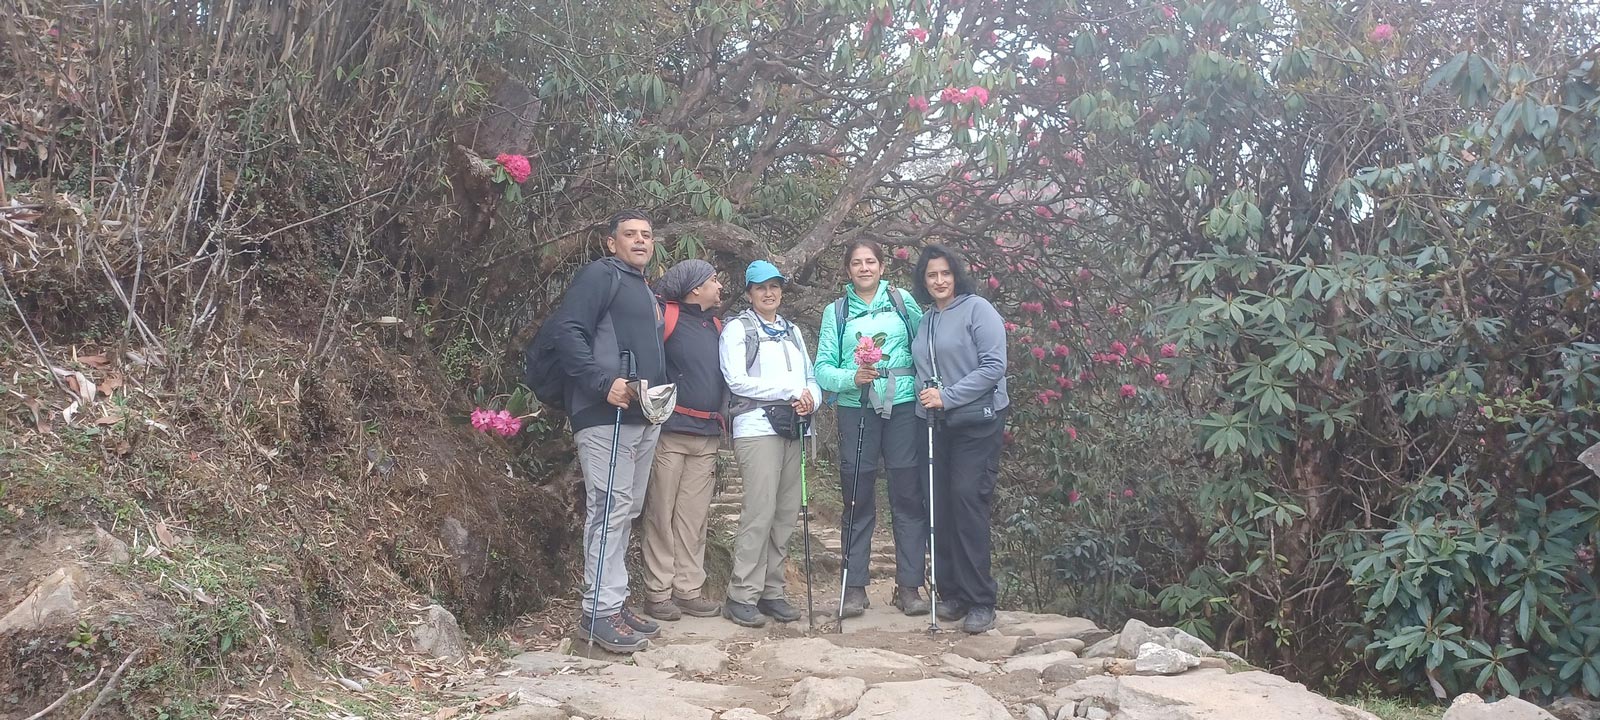 Mardi Himal Trail - Rhododendron Forest